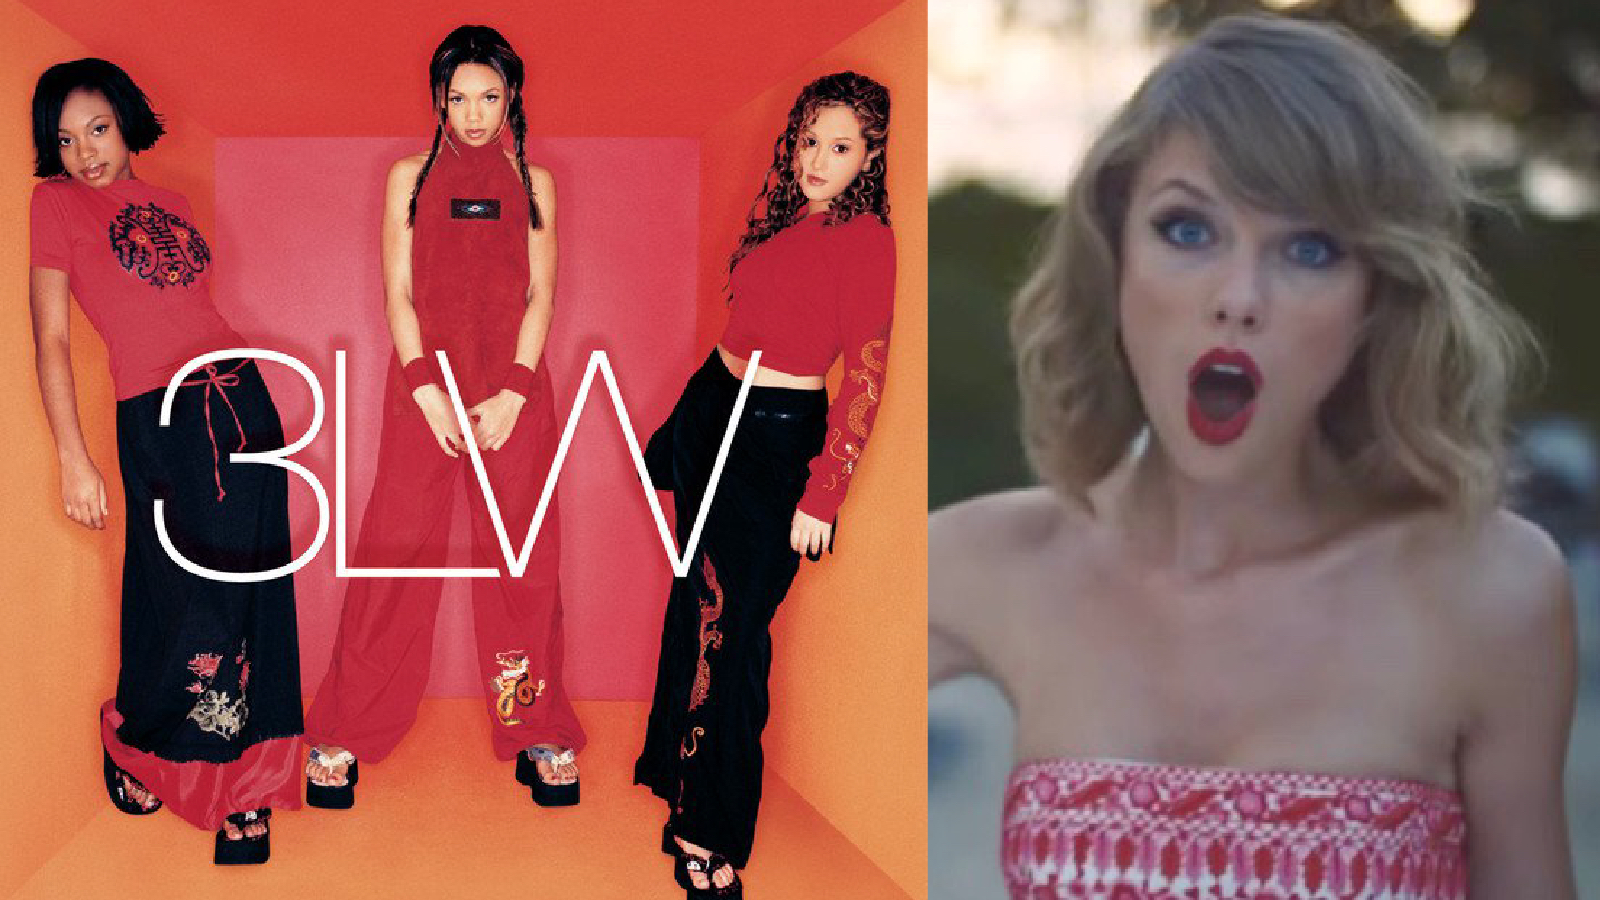 Taylor Swift Is Getting Sued For Allegedly Jacking 3lw S Lyrics